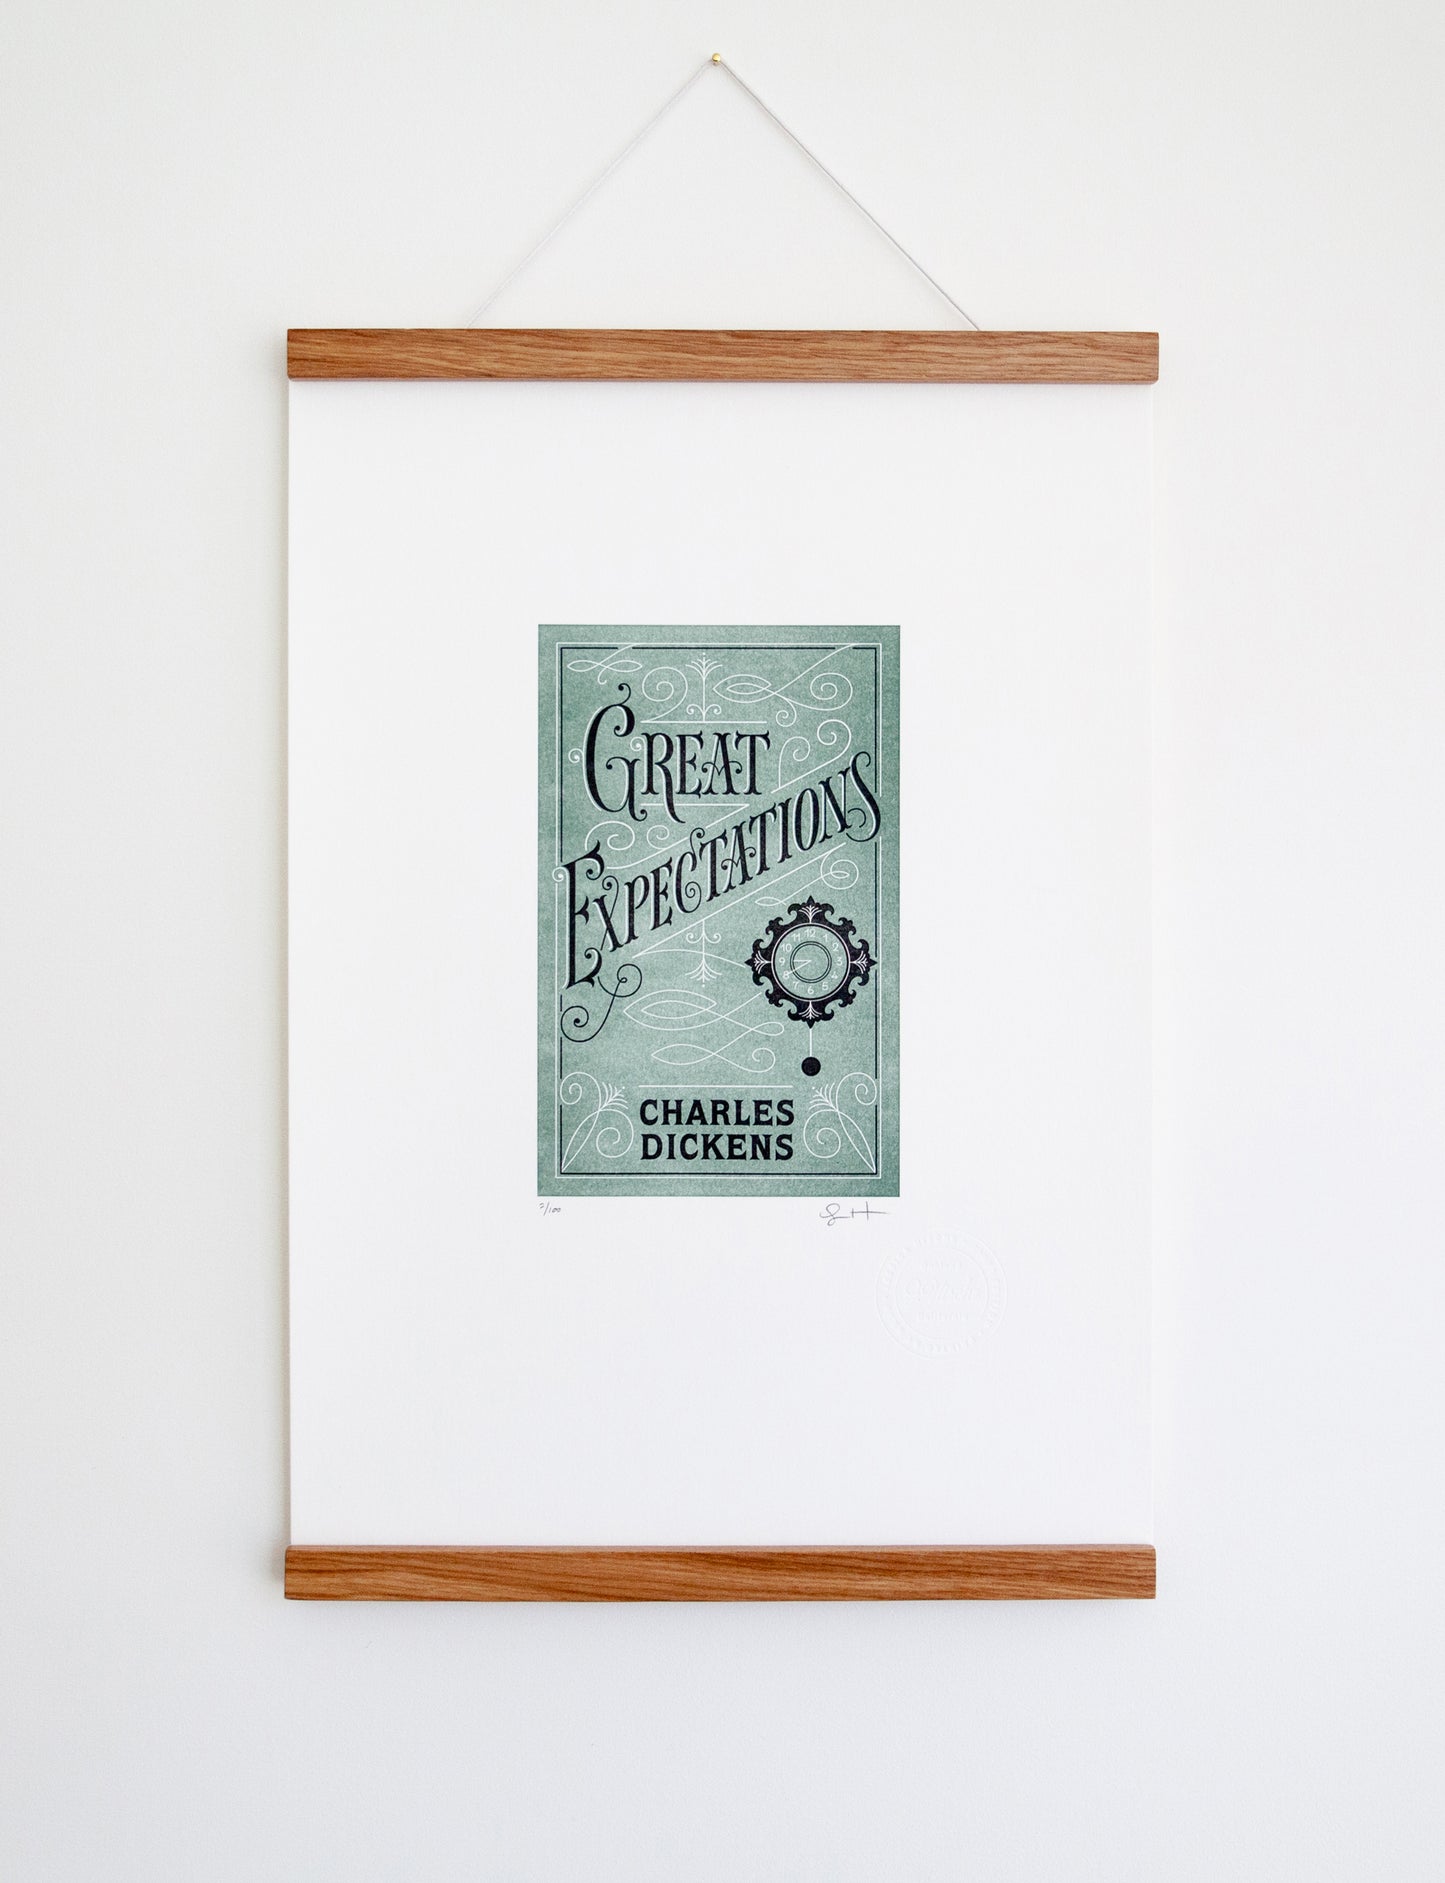 Framed 2-color letterpress print in green and black. Printed artwork is an illustrated book cover of Great Expectations including custom hand lettering.